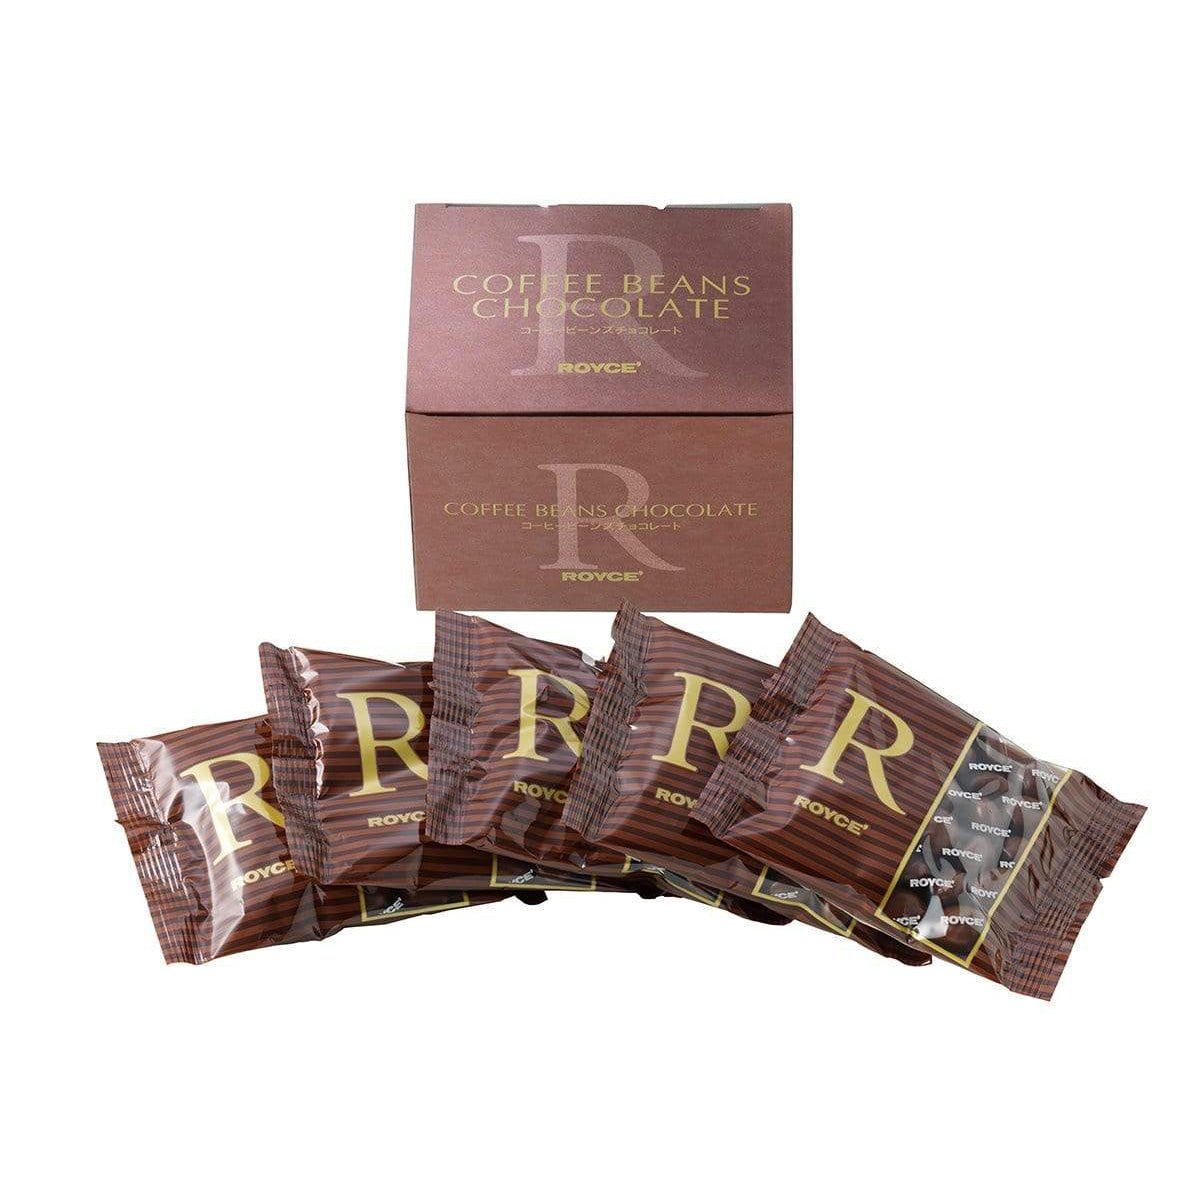 ROYCE' Chocolate - Coffee Beans Chocolate - Image shows a brown box with the words Coffee Beans Chocolate on top and bottom. Below are five packets with brown stripes and golden letters. Text says R ROYCE'.